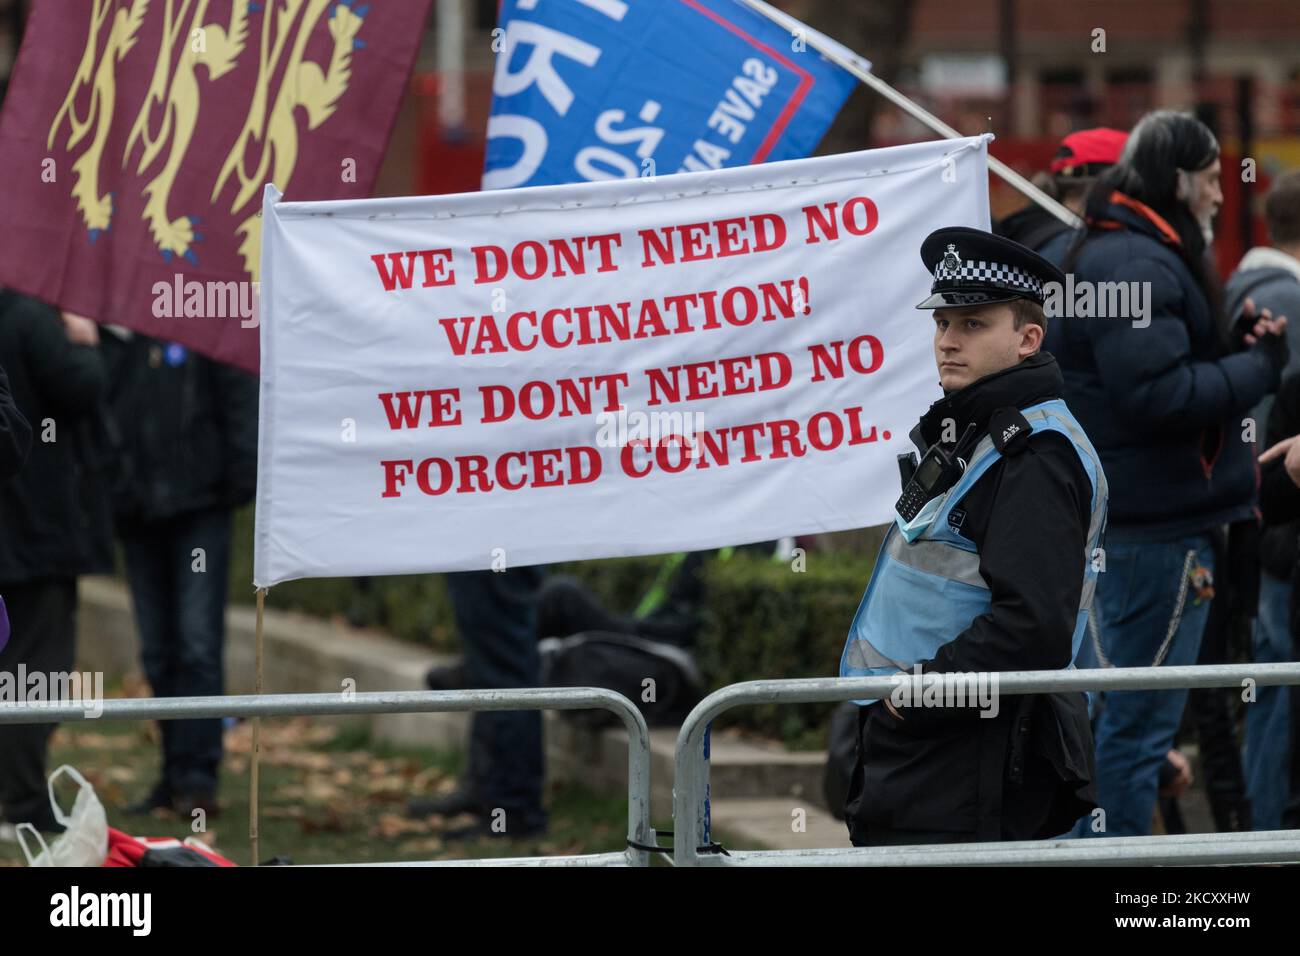 LONDON, UNITED KINGDOM - DECEMBER 15, 2021: Demonstrators protest outside Houses of Parliament against vaccine passports and mandates after MPs voted yesterday in favour of Covid vaccine certificates for some larger venues as well as mandatory vaccinations for NHS and social care workers in England on December 15, 2021 in London, England. The measures approved by MPs are part of the government's winter Plan B introduced in response to the emergence of the new coronavirus variant - Omicron - and a rapid rise in cases in the run up to Christmas. (Photo by WIktor Szymanowicz/NurPhoto) Stock Photo